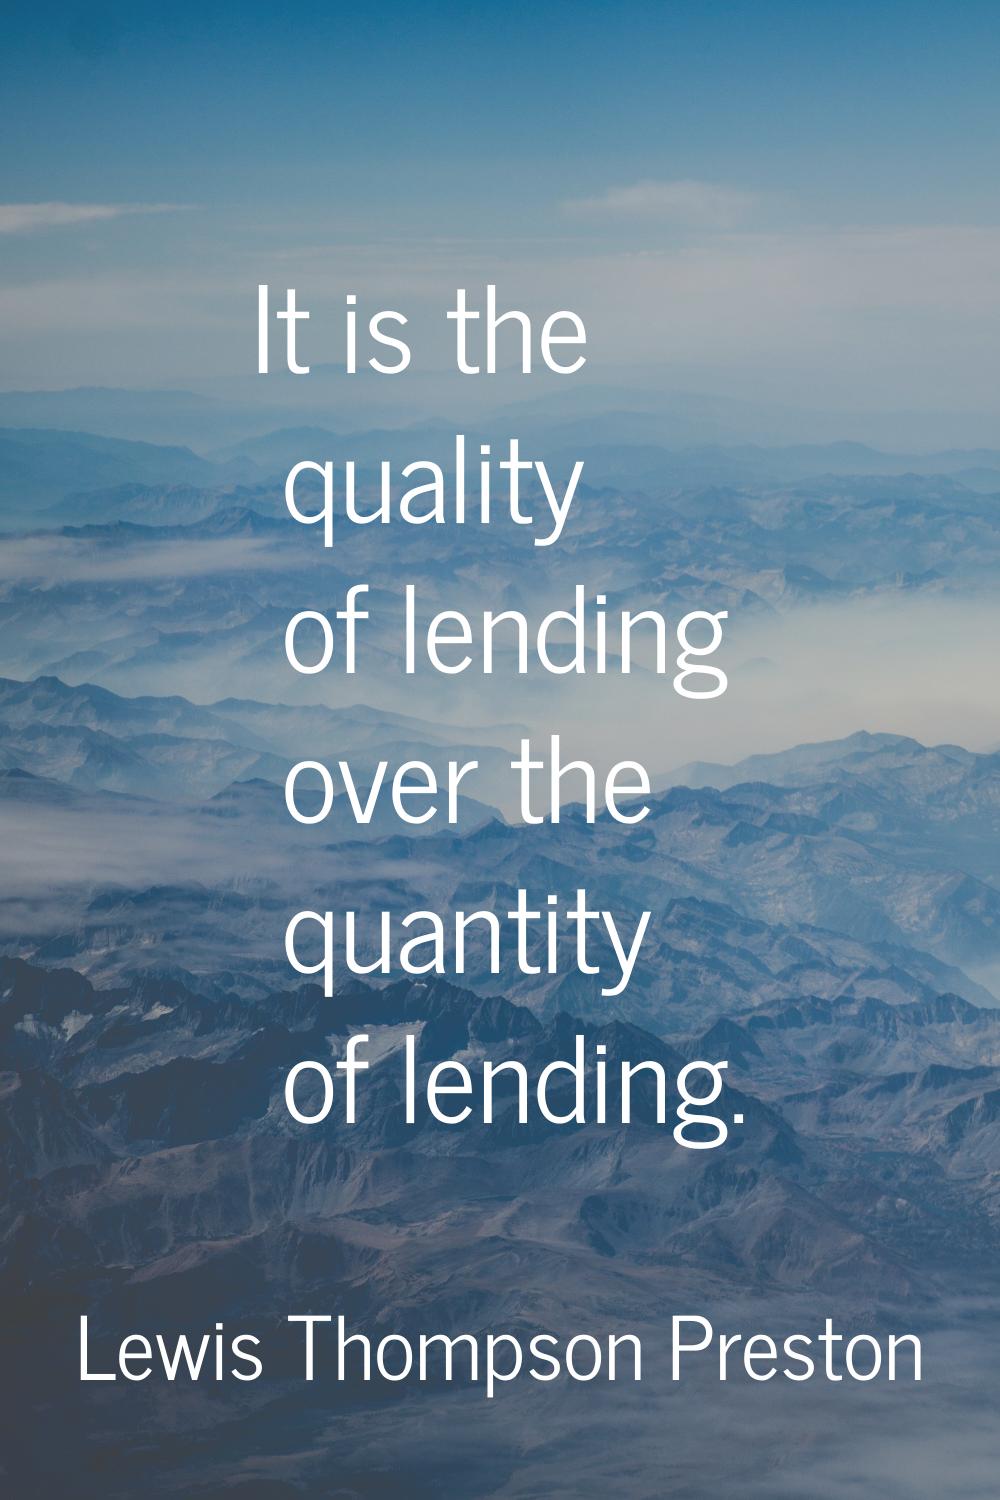 It is the quality of lending over the quantity of lending.